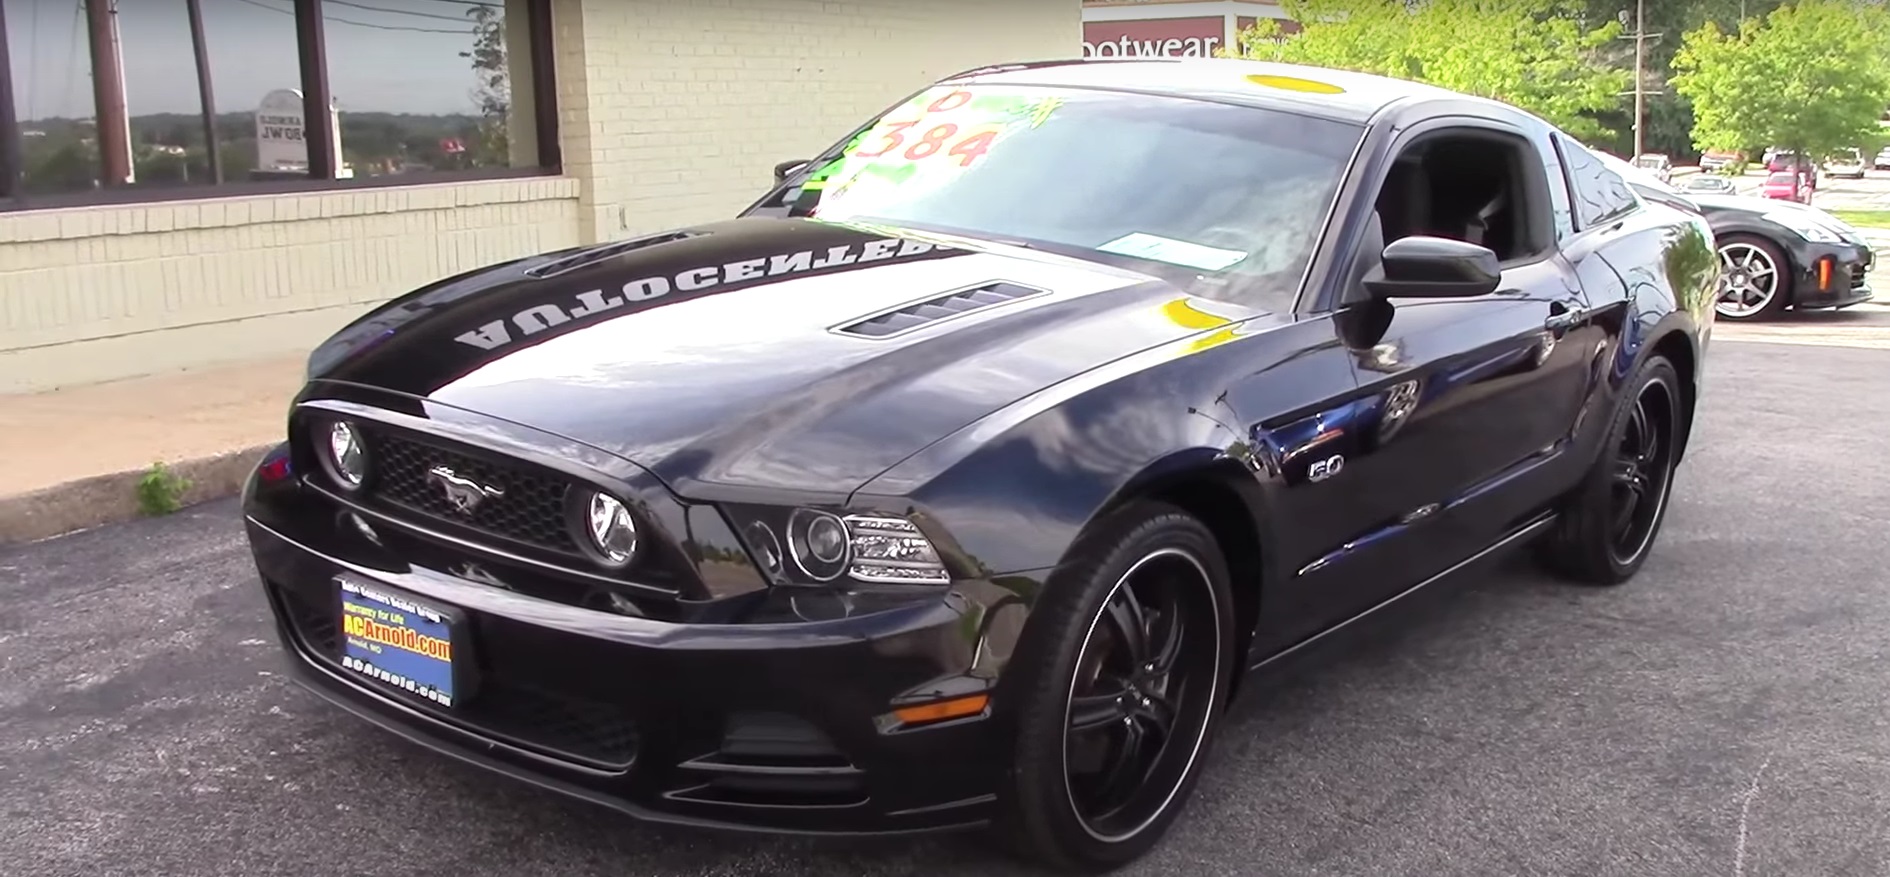 Video: 2013 Ford Mustang GT 5.0 6 Speed Full Tour & Start Up